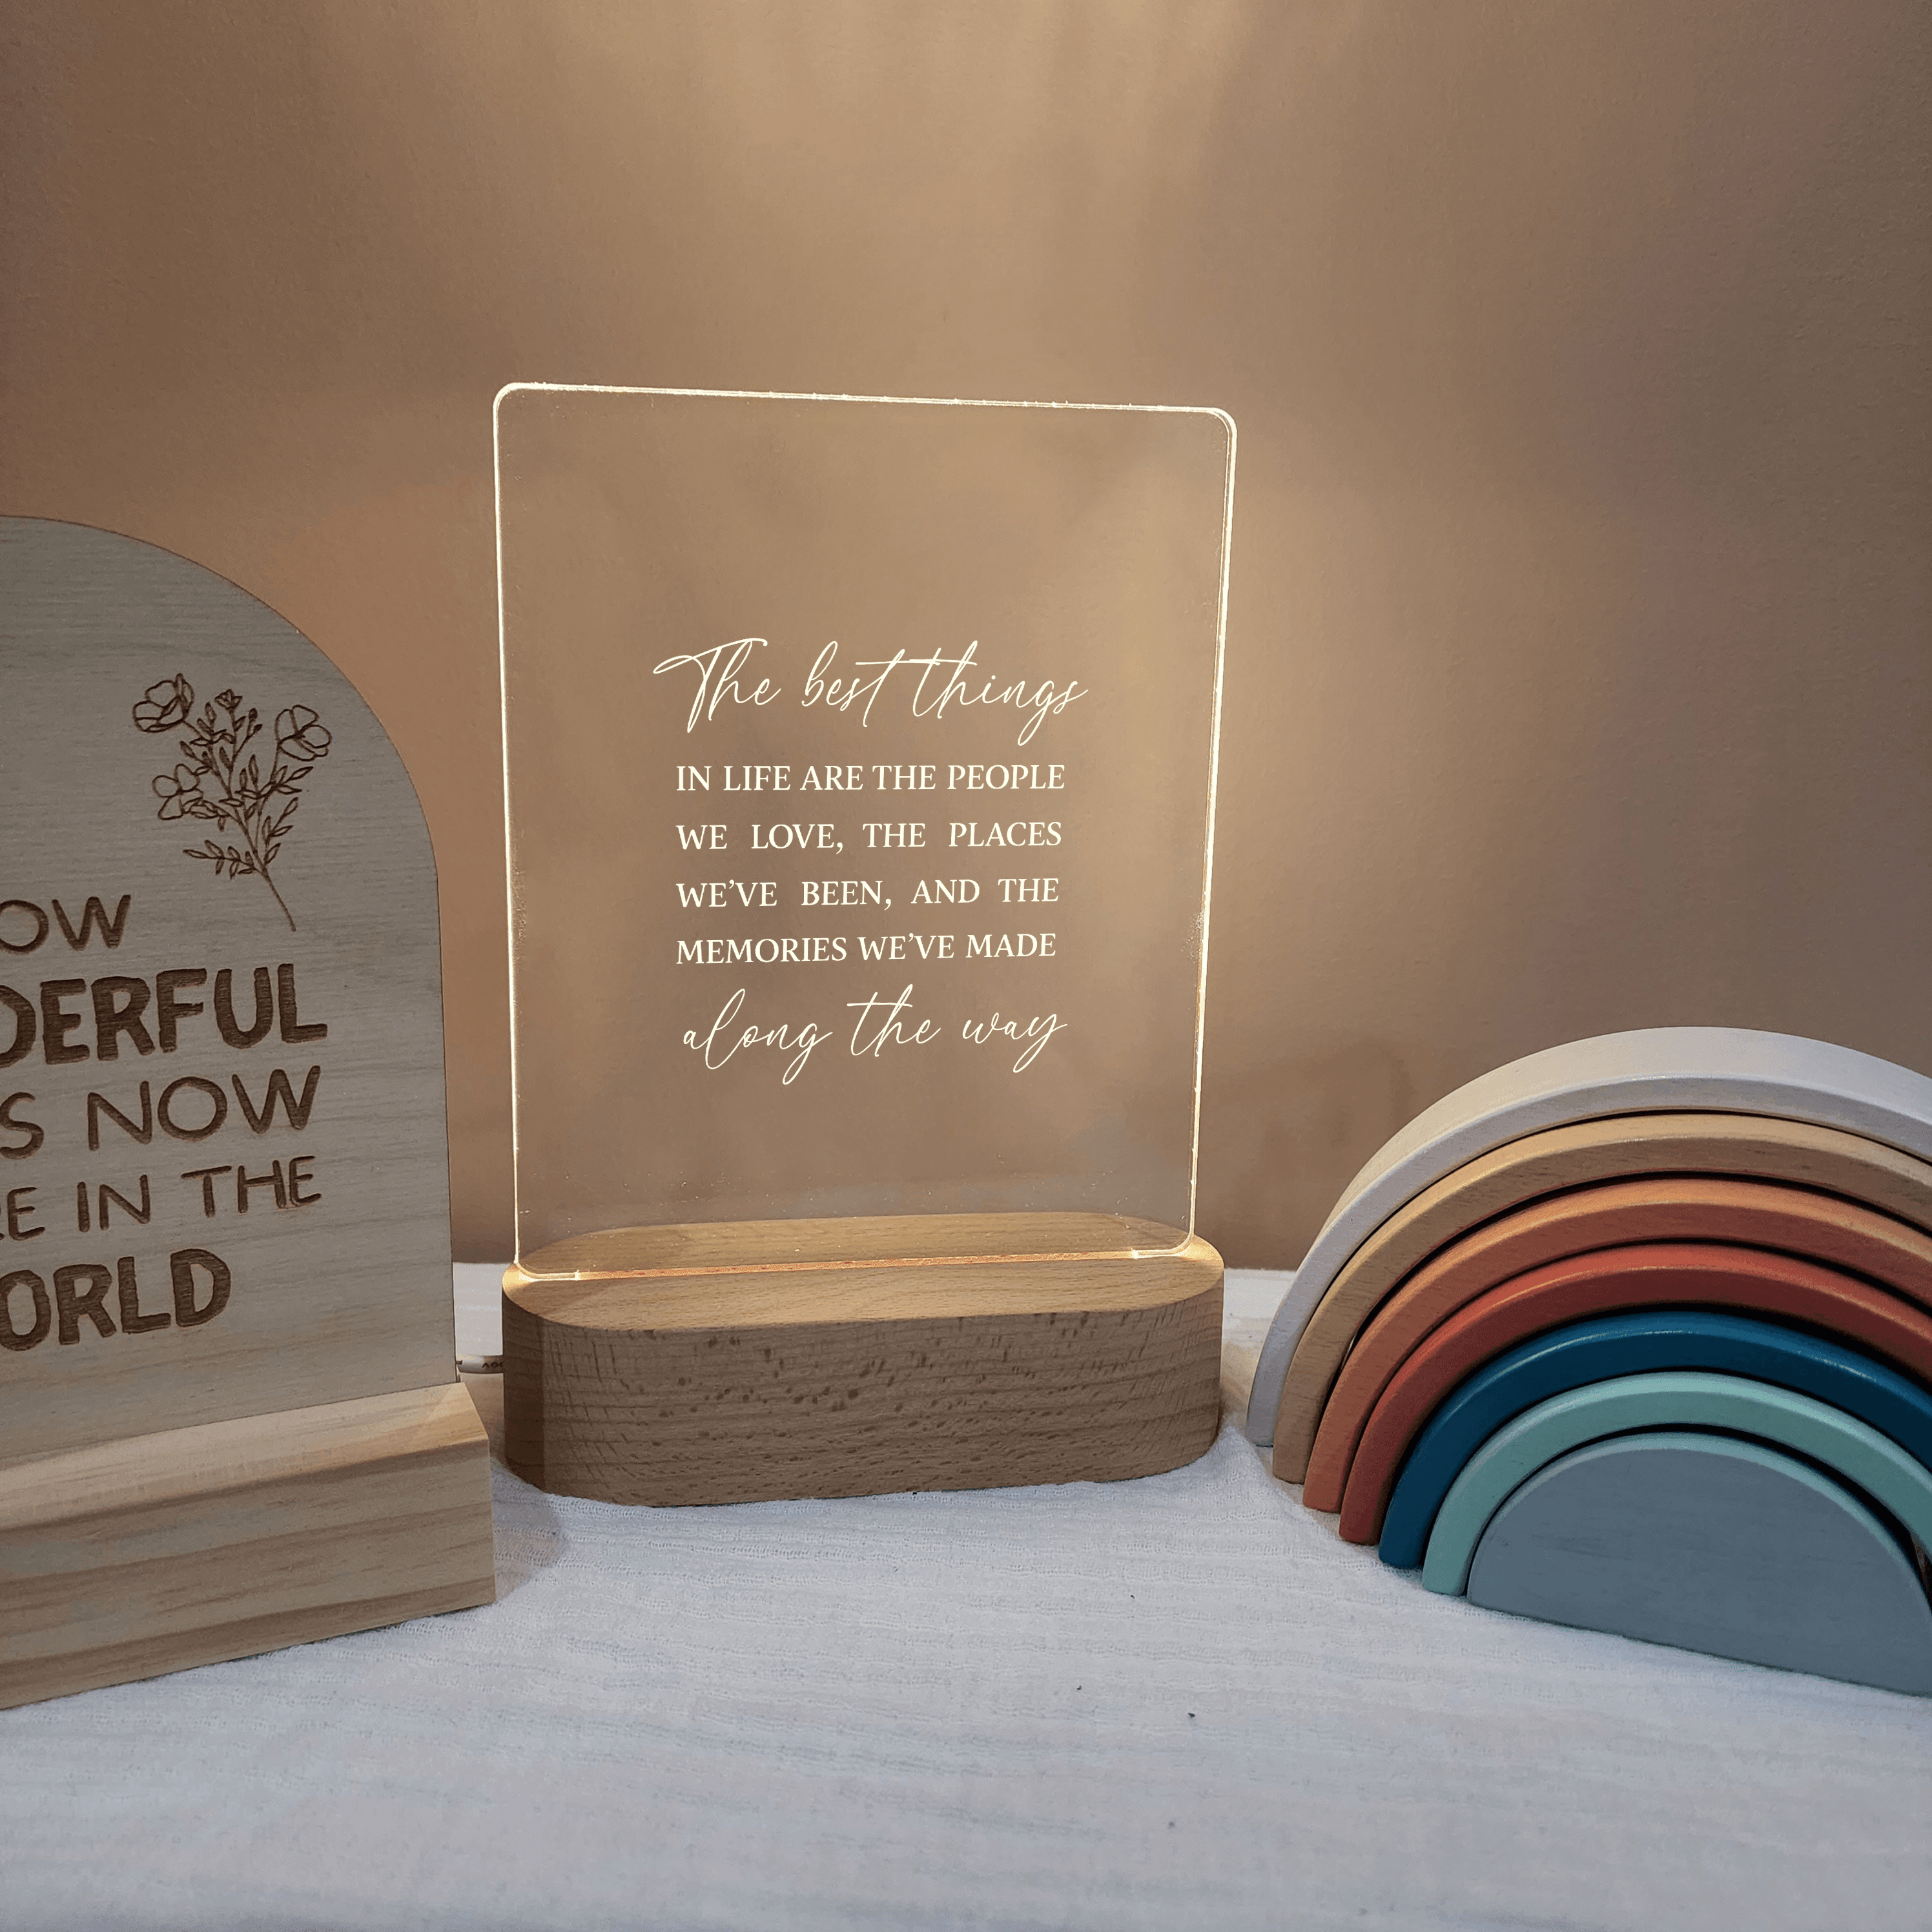 Quote Night Light 🌙 - The Best Things in Life - The Willow Corner